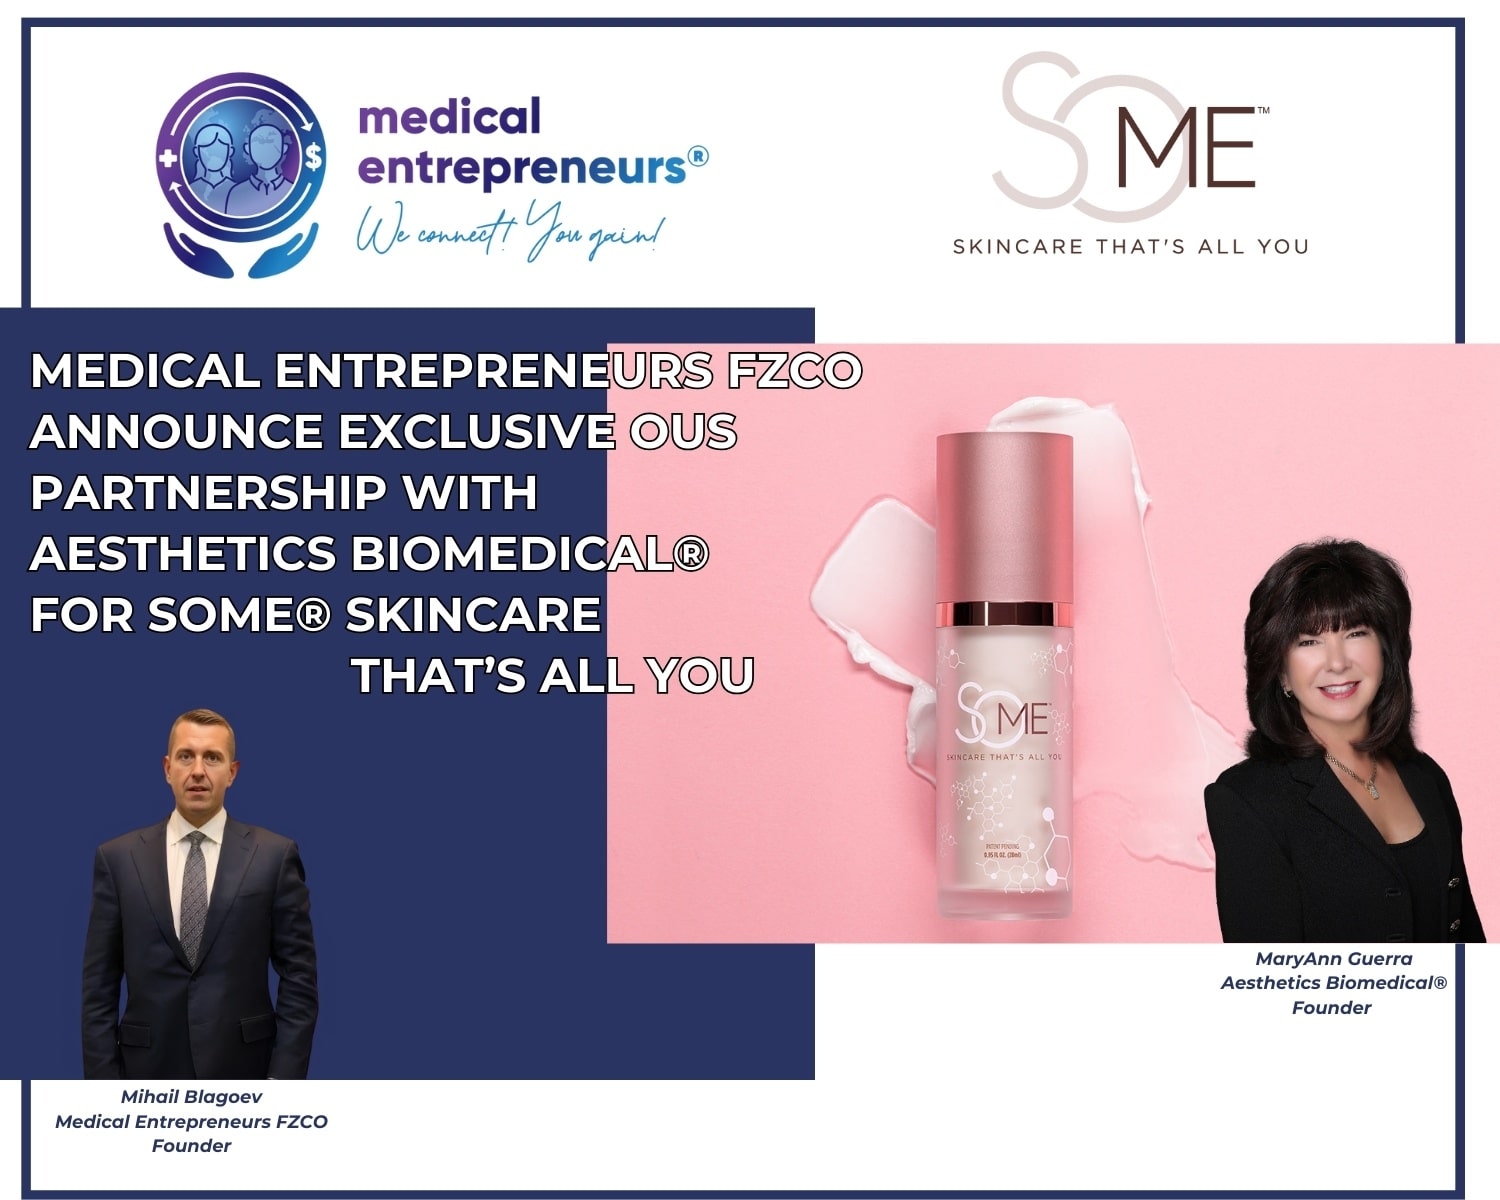 Medical Entrepreneurs announce Exclusive OUS Partnership with Aesthetics Biomedical for SoMe Skincare